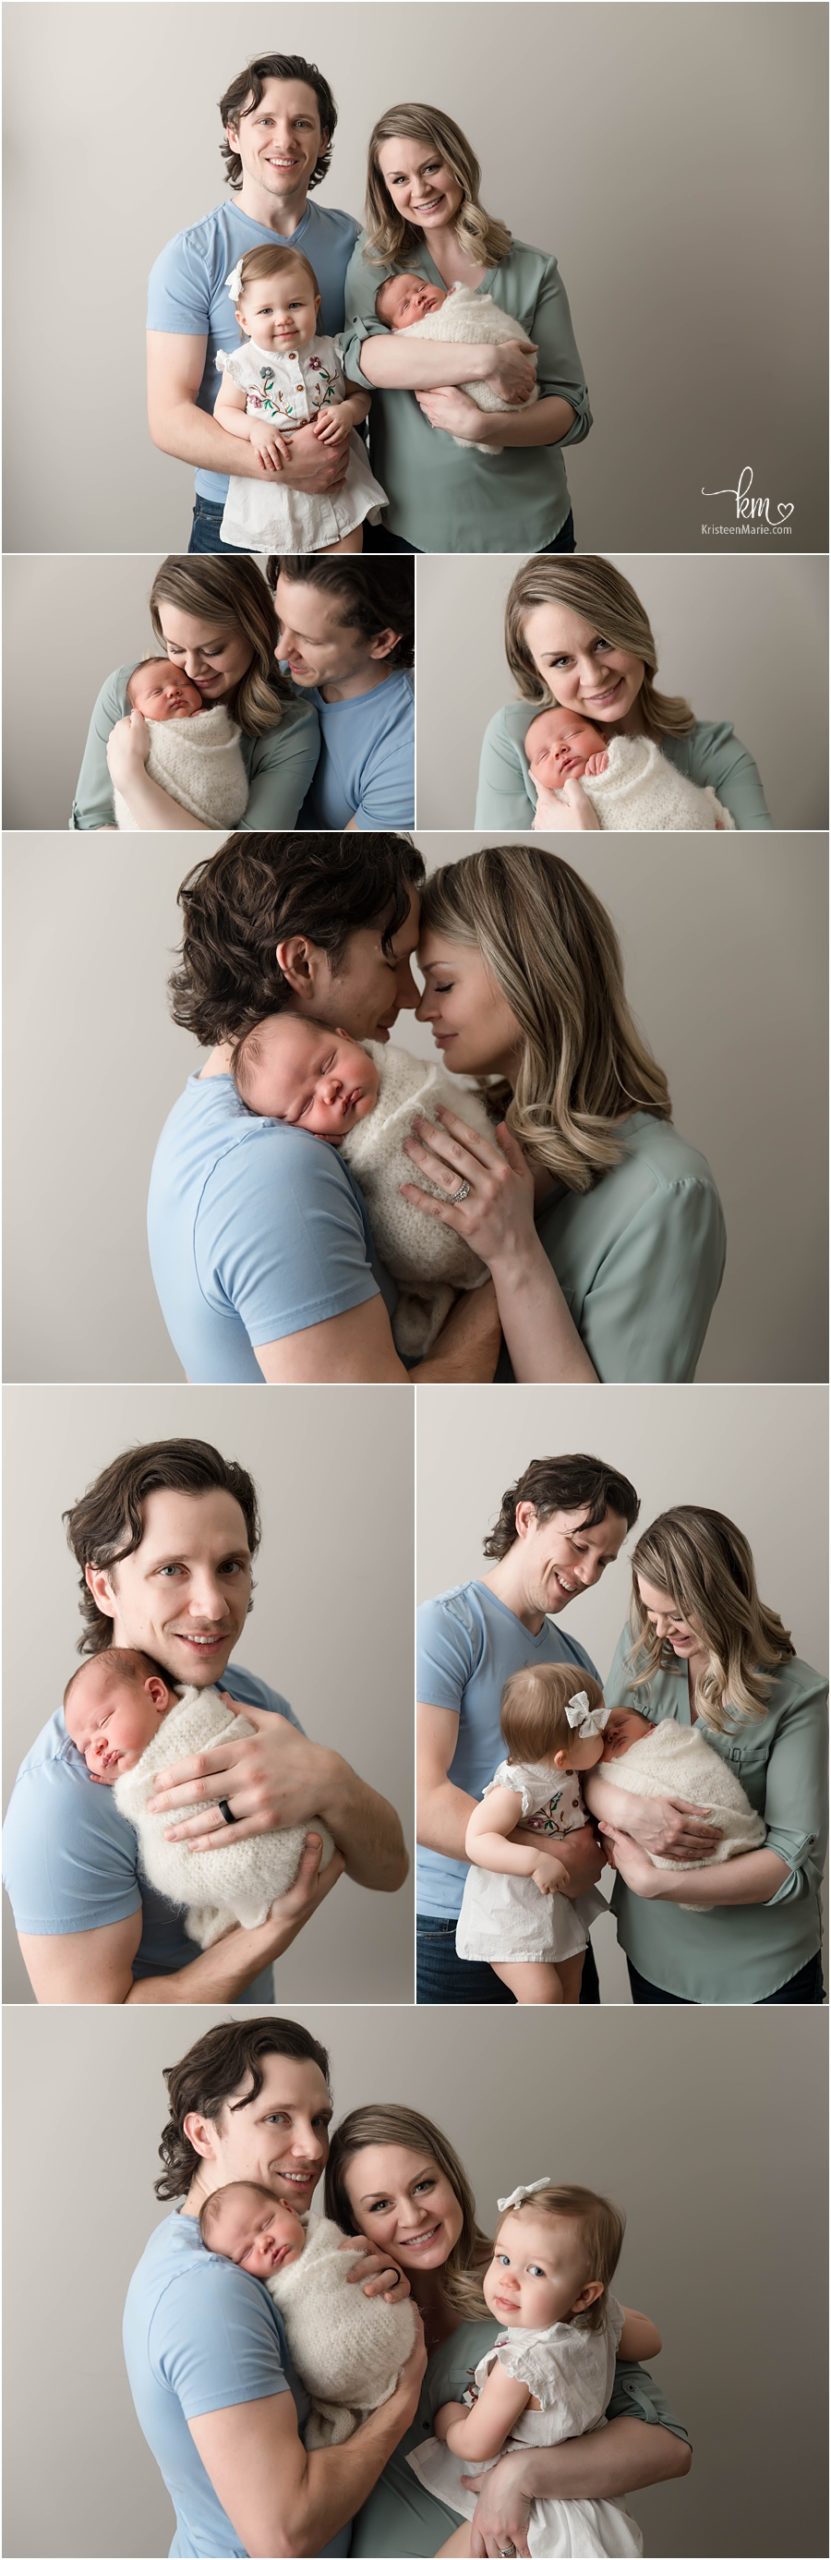 family pictures with newborn baby - neutral colors family poses - family of 4